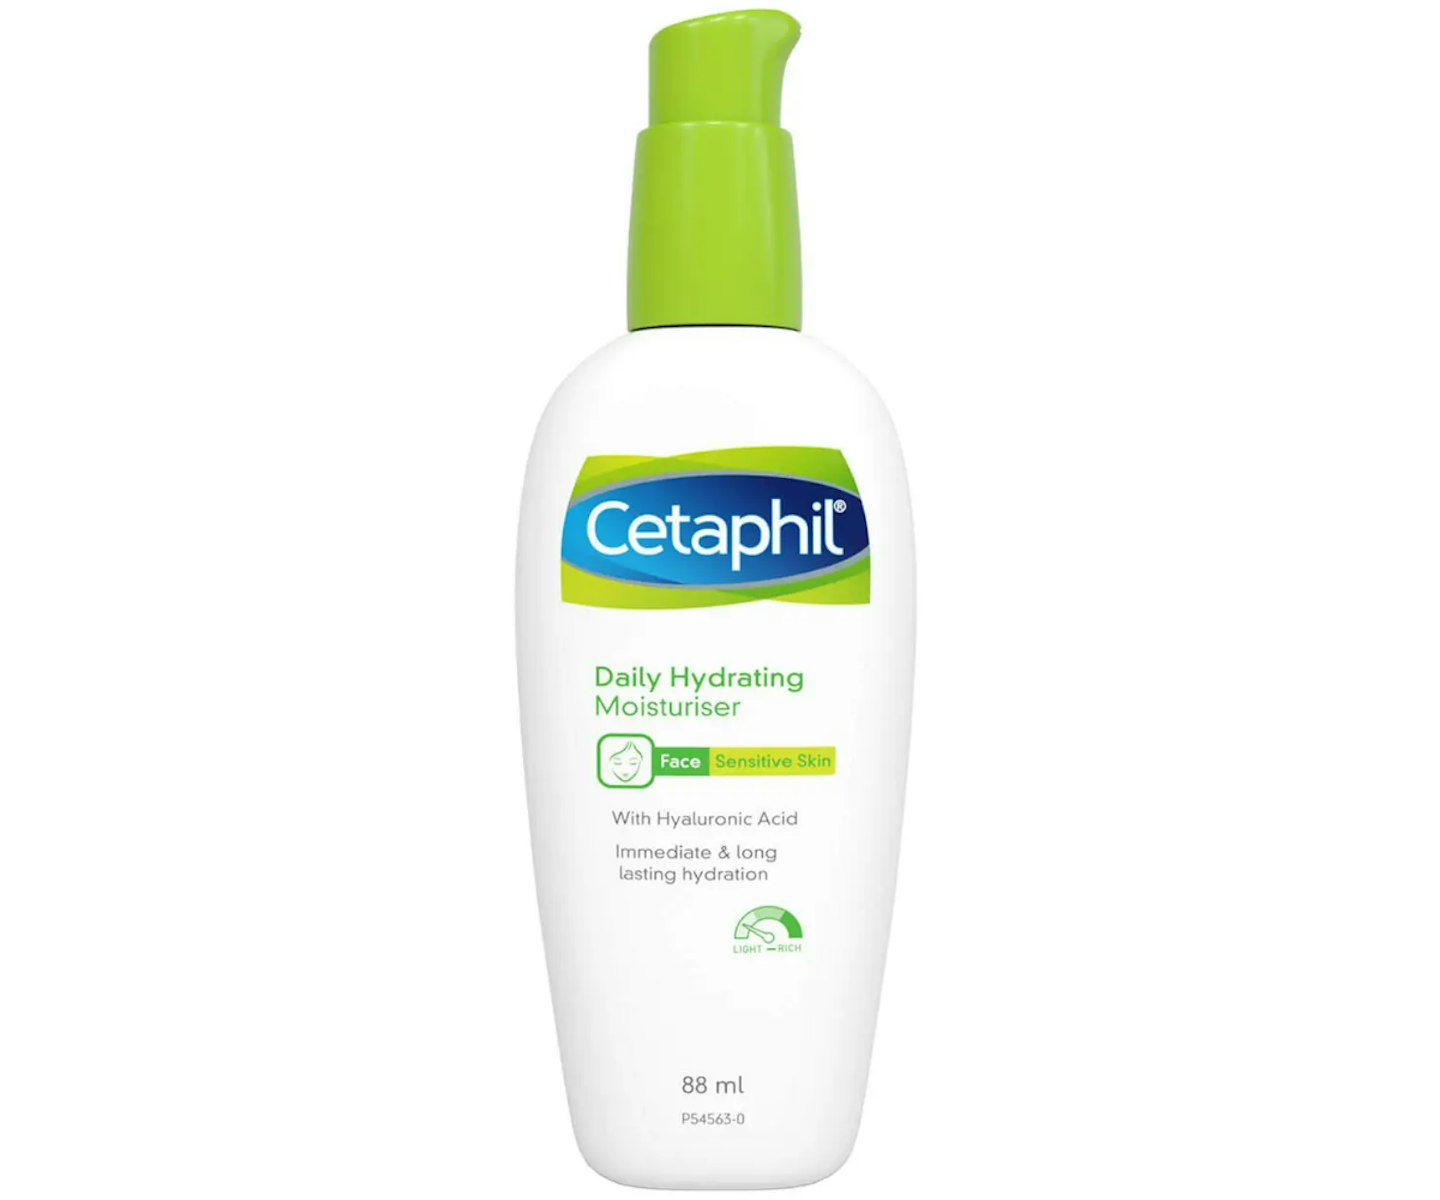 A picture of the Cetaphil Daily Hydrating Face Moisturiser